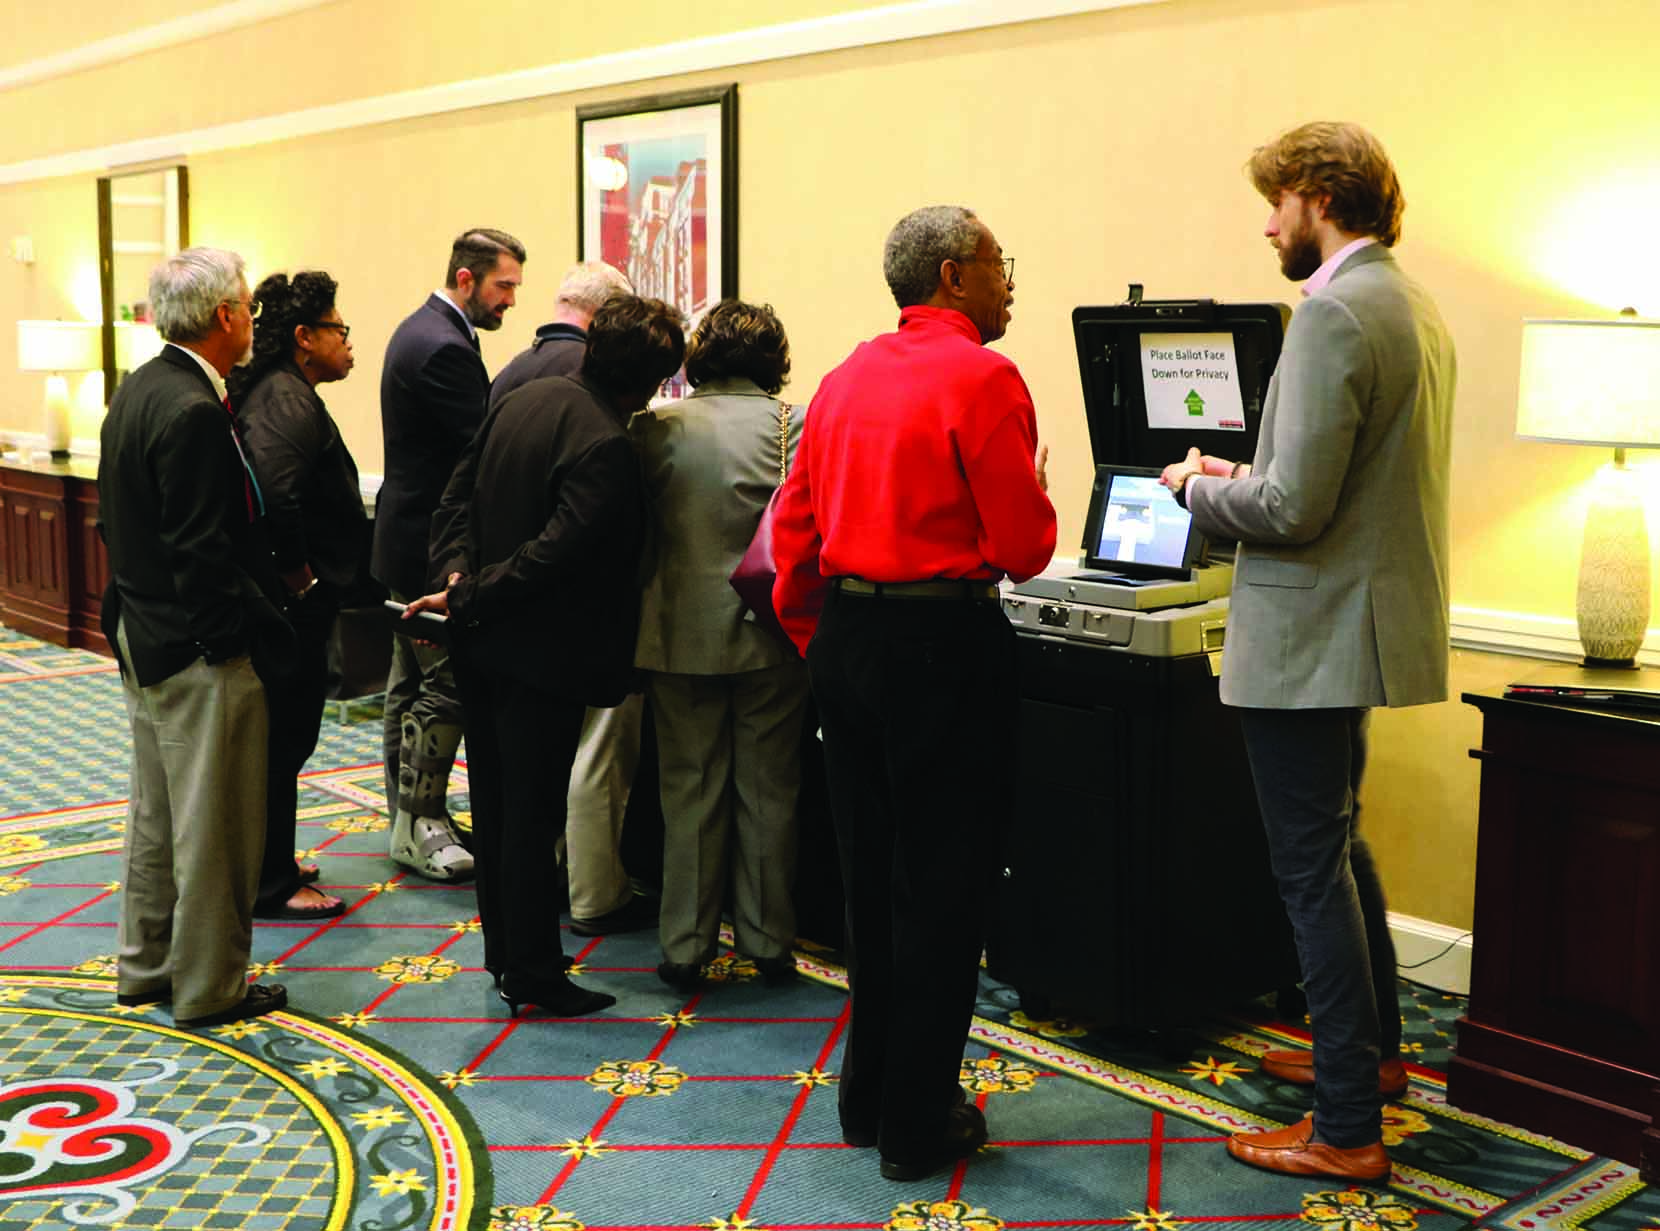 The SC State Election Commission exhibited the state’s new voting system during Hometown Legislative Action Day